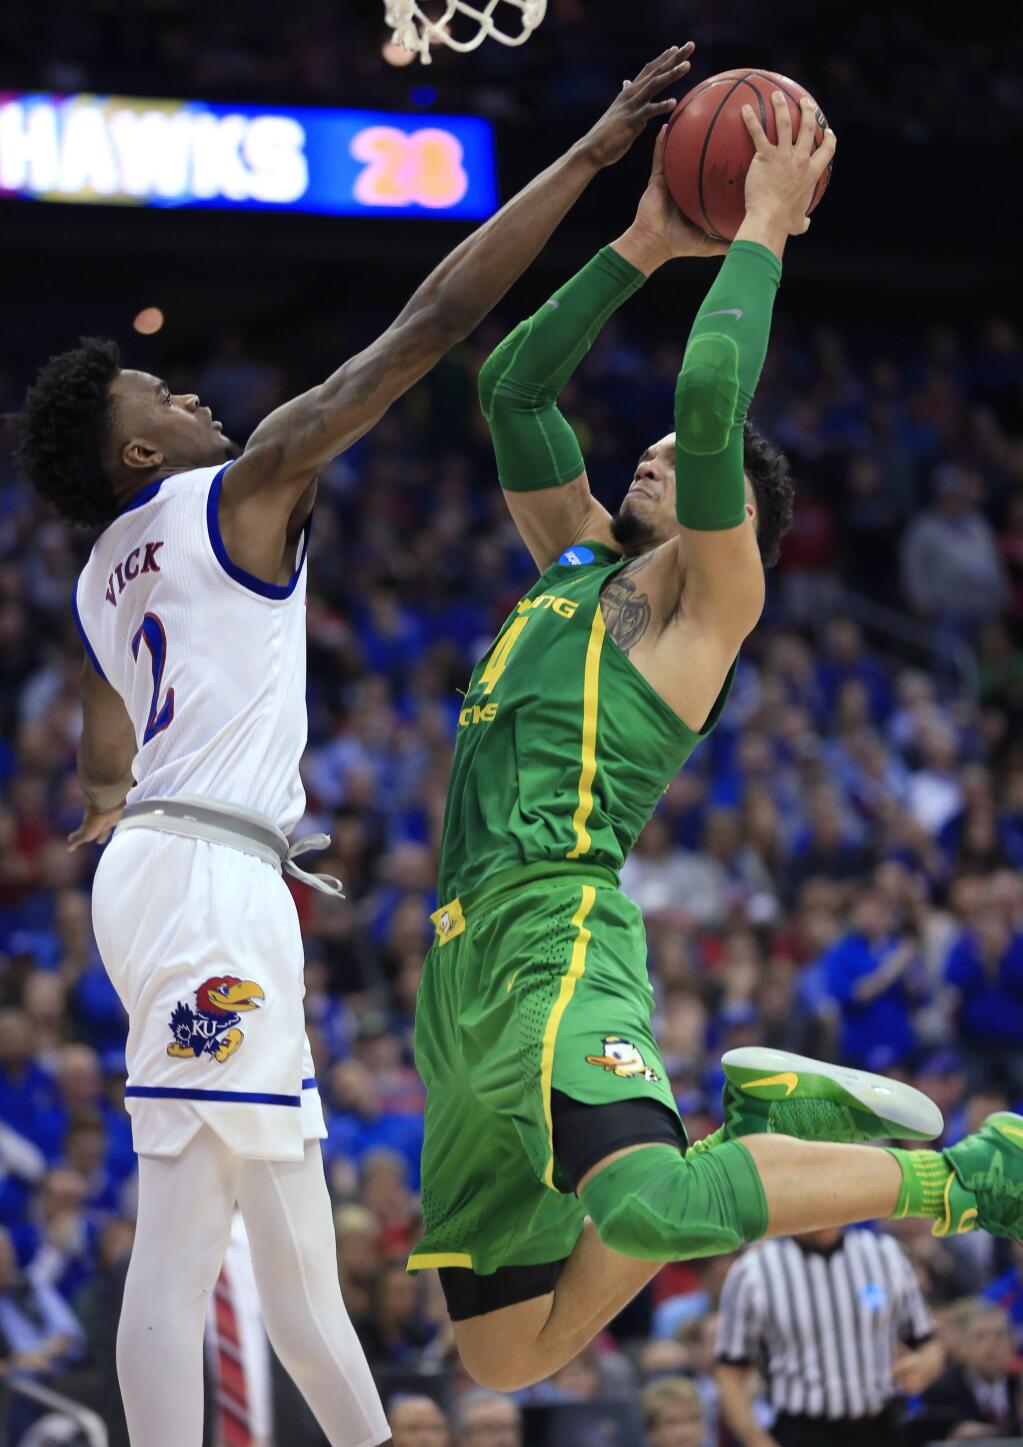 Oregon forward Dillon Brooks, right, shoots over Kansas guard Lagerald Vick during the first half of the Midwest Regional final of the NCAA tournament, Saturday, March 25, 2017, in Kansas City, Mo. (AP Photo/Orlin Wagner)